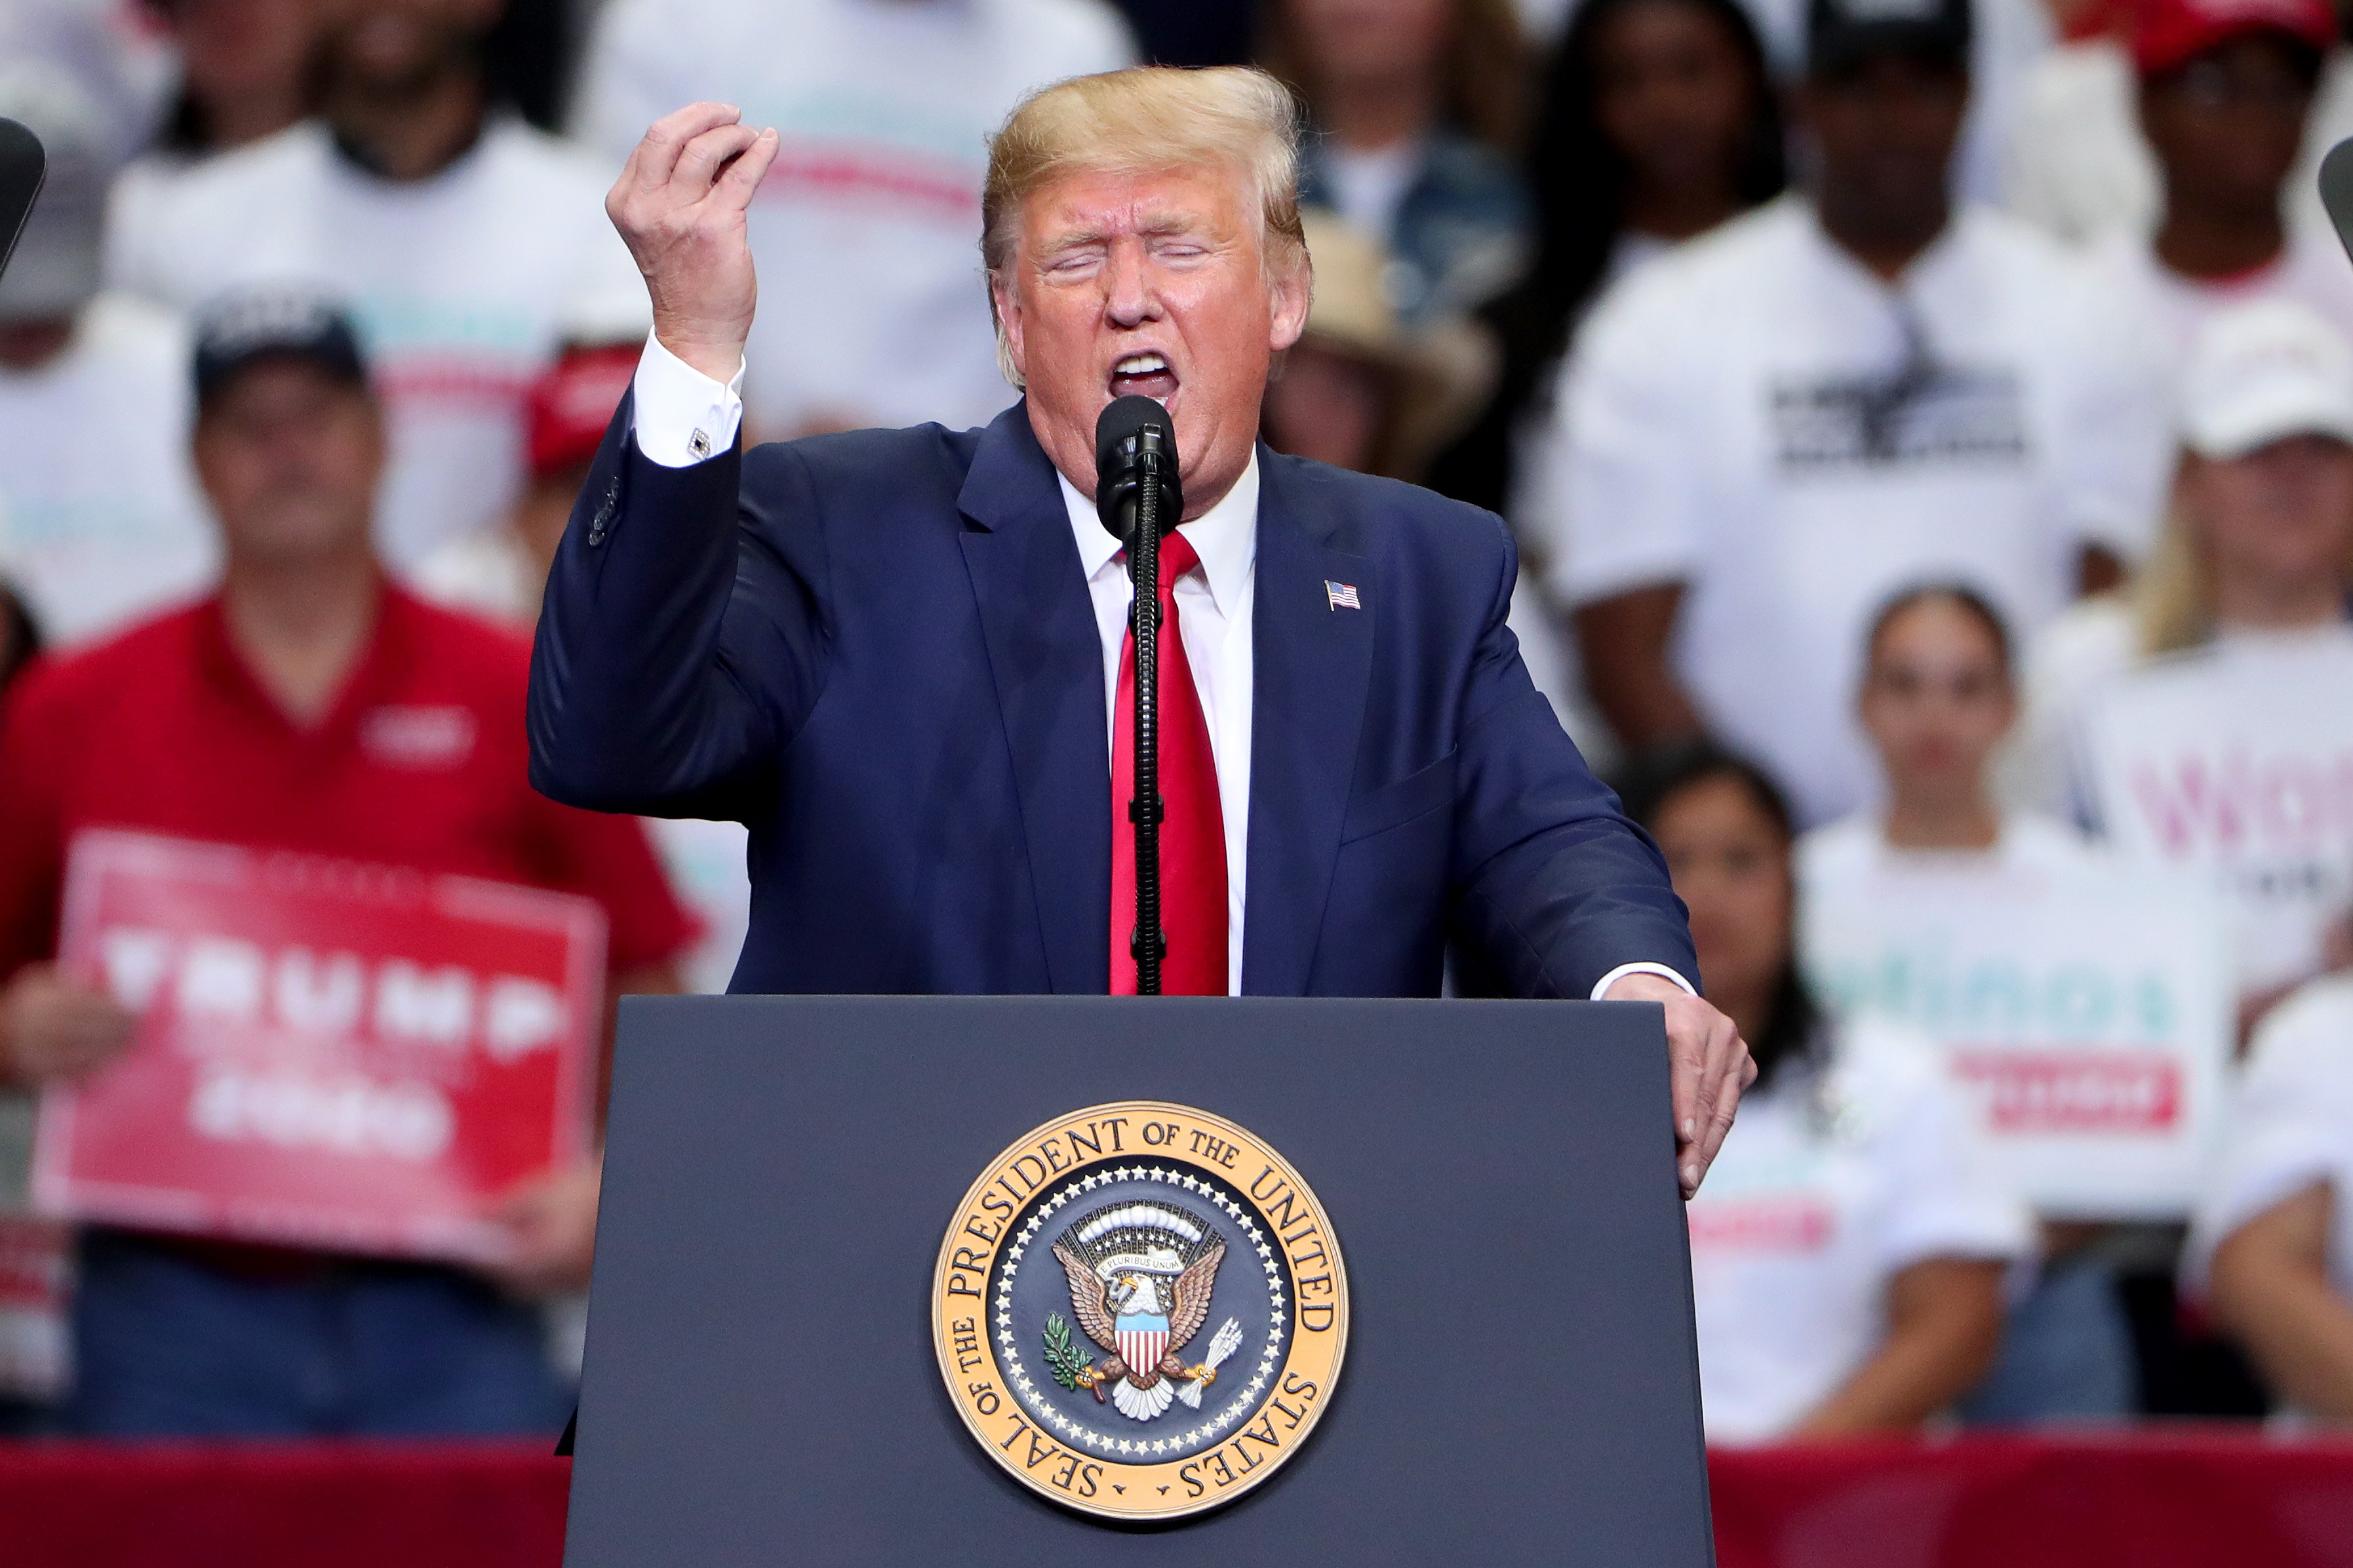 DALLAS, TEXAS - OCTOBER 17: U.S. President Donald Trump speaks during a "Keep America Great" Campaign Rally at American Airlines Center on October 17, 2019 in Dallas, Texas. (Photo by Tom Pennington/Getty Images)